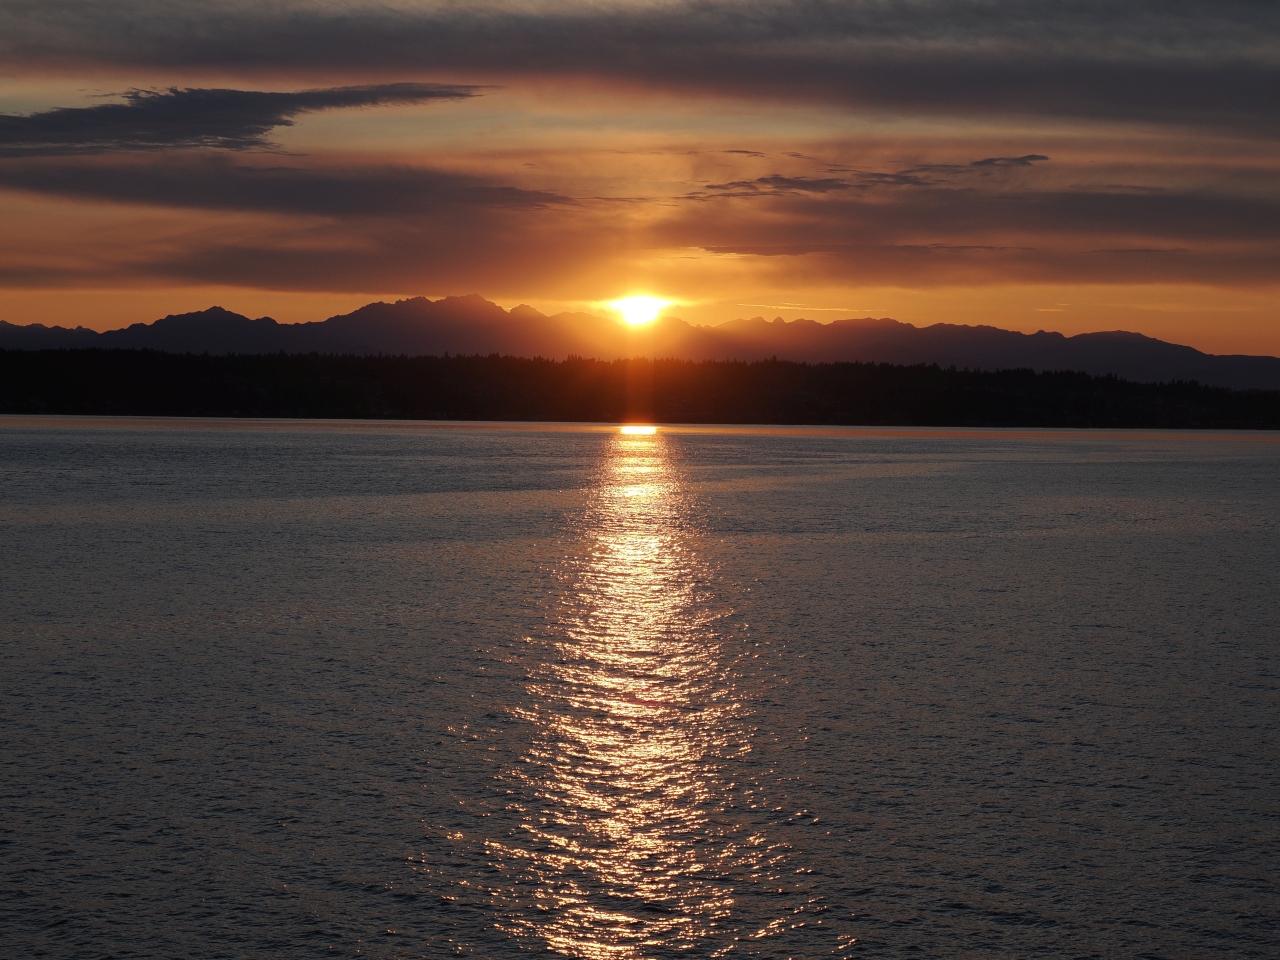 Ferry delays at least meant a sunset trip back to West Seattle